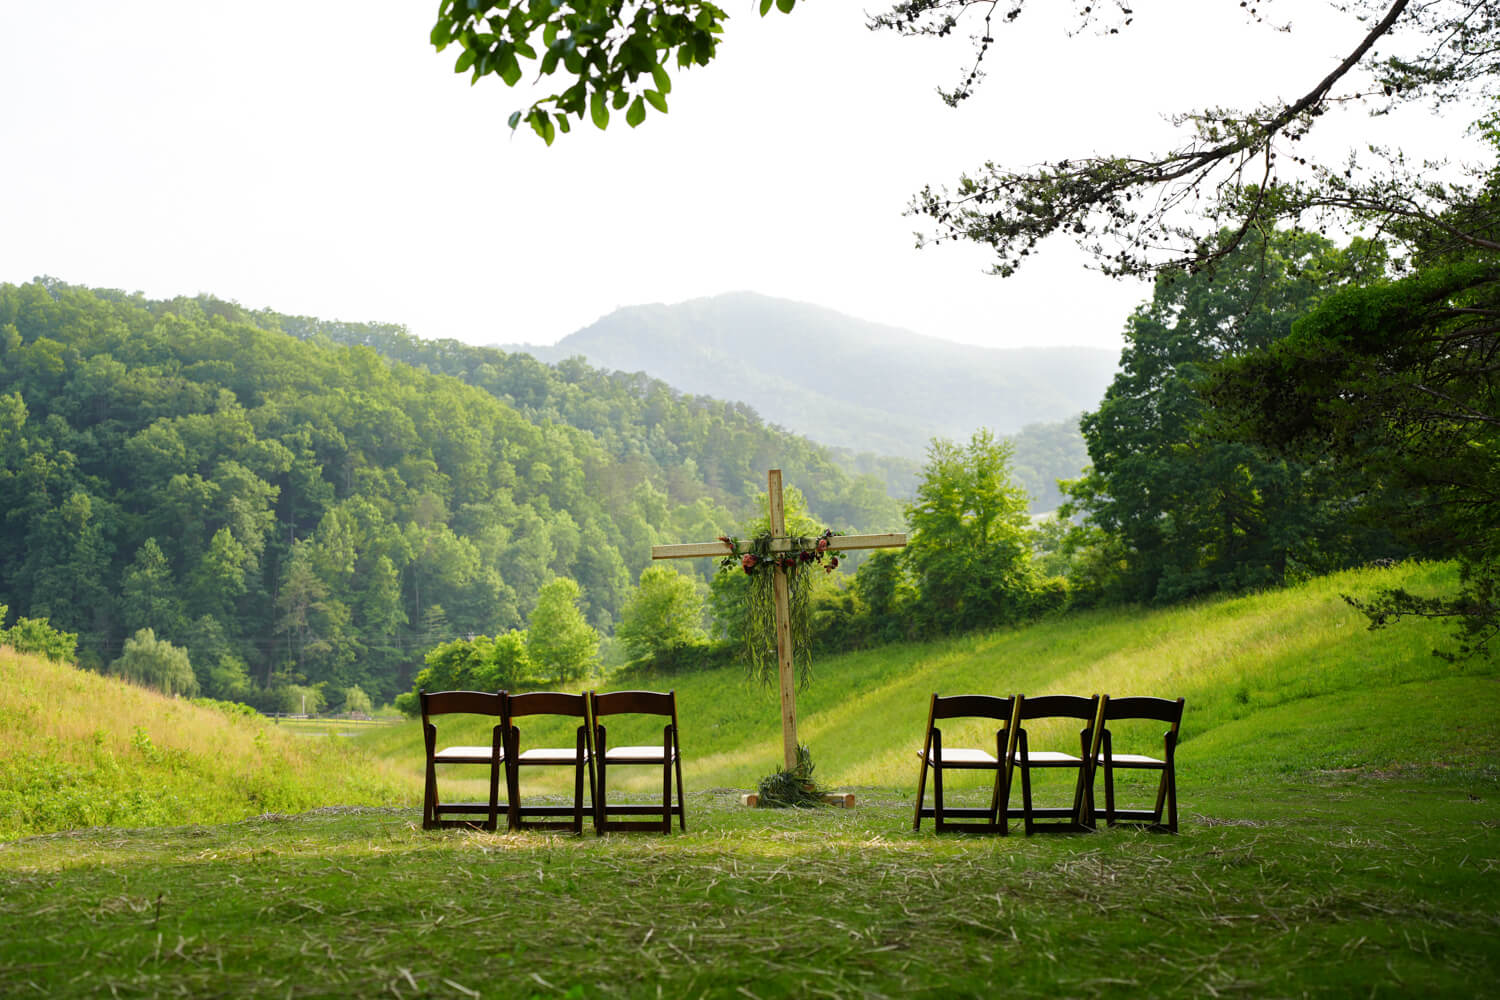 Wedding Ceremony site with a mountain view in the middle of a meadow with dark wooden folding chairs and a tall wooden cross